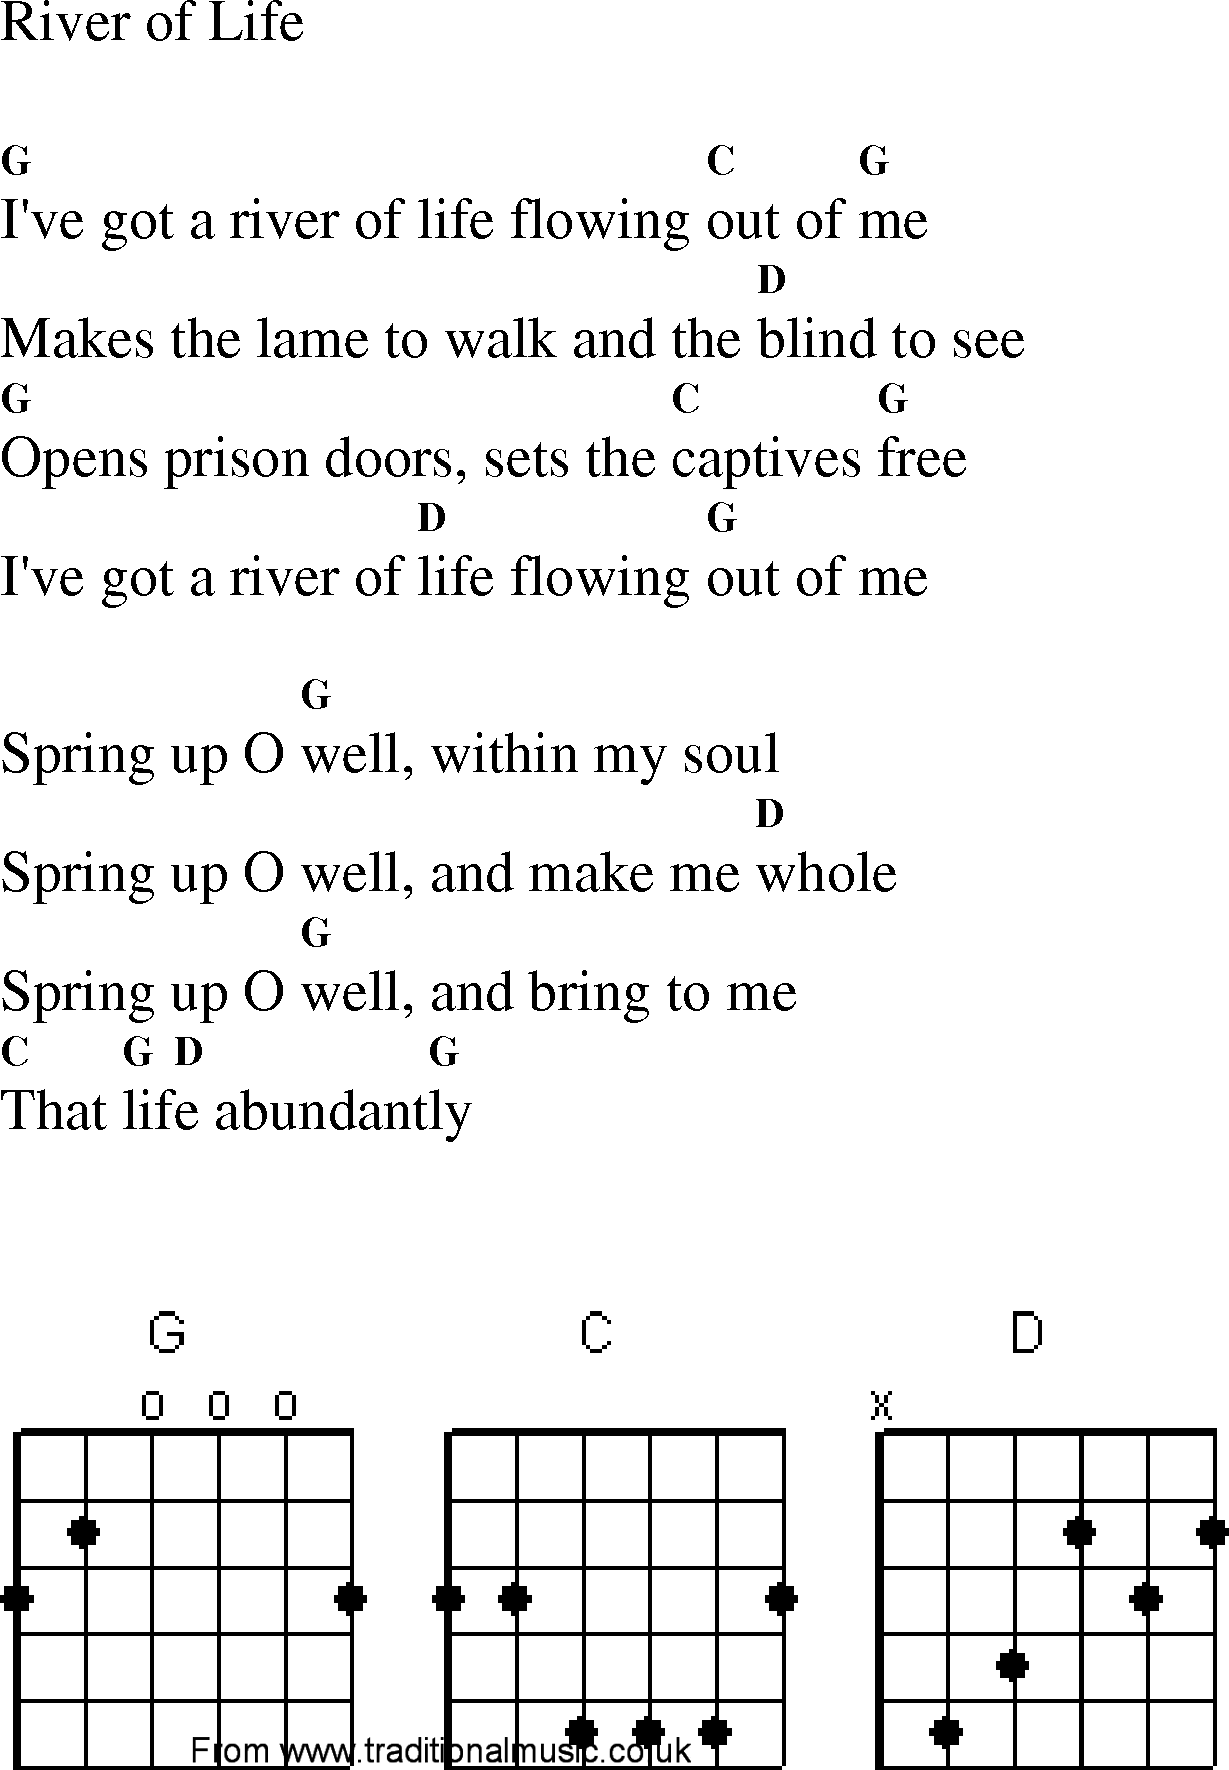 Gospel Song: river_of_life, lyrics and chords.